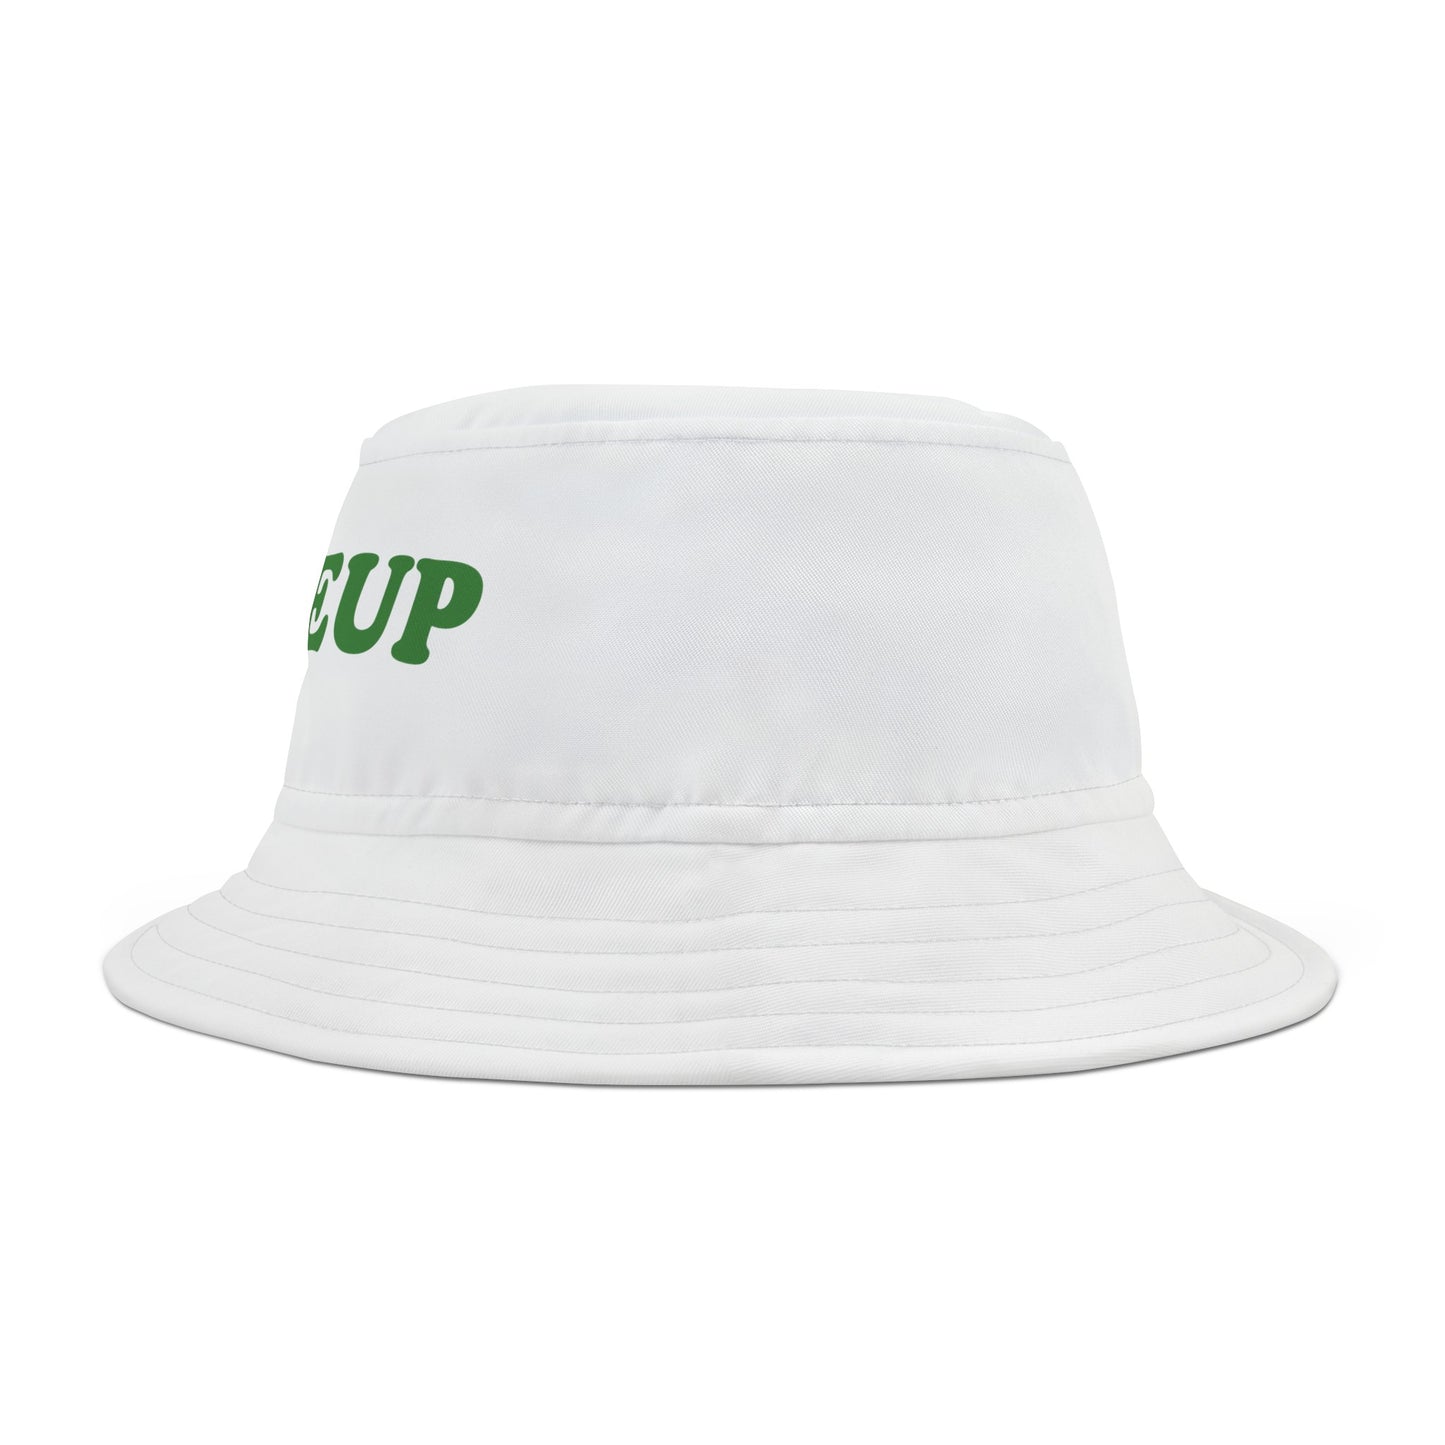 TRIBE UP Bucket Hat